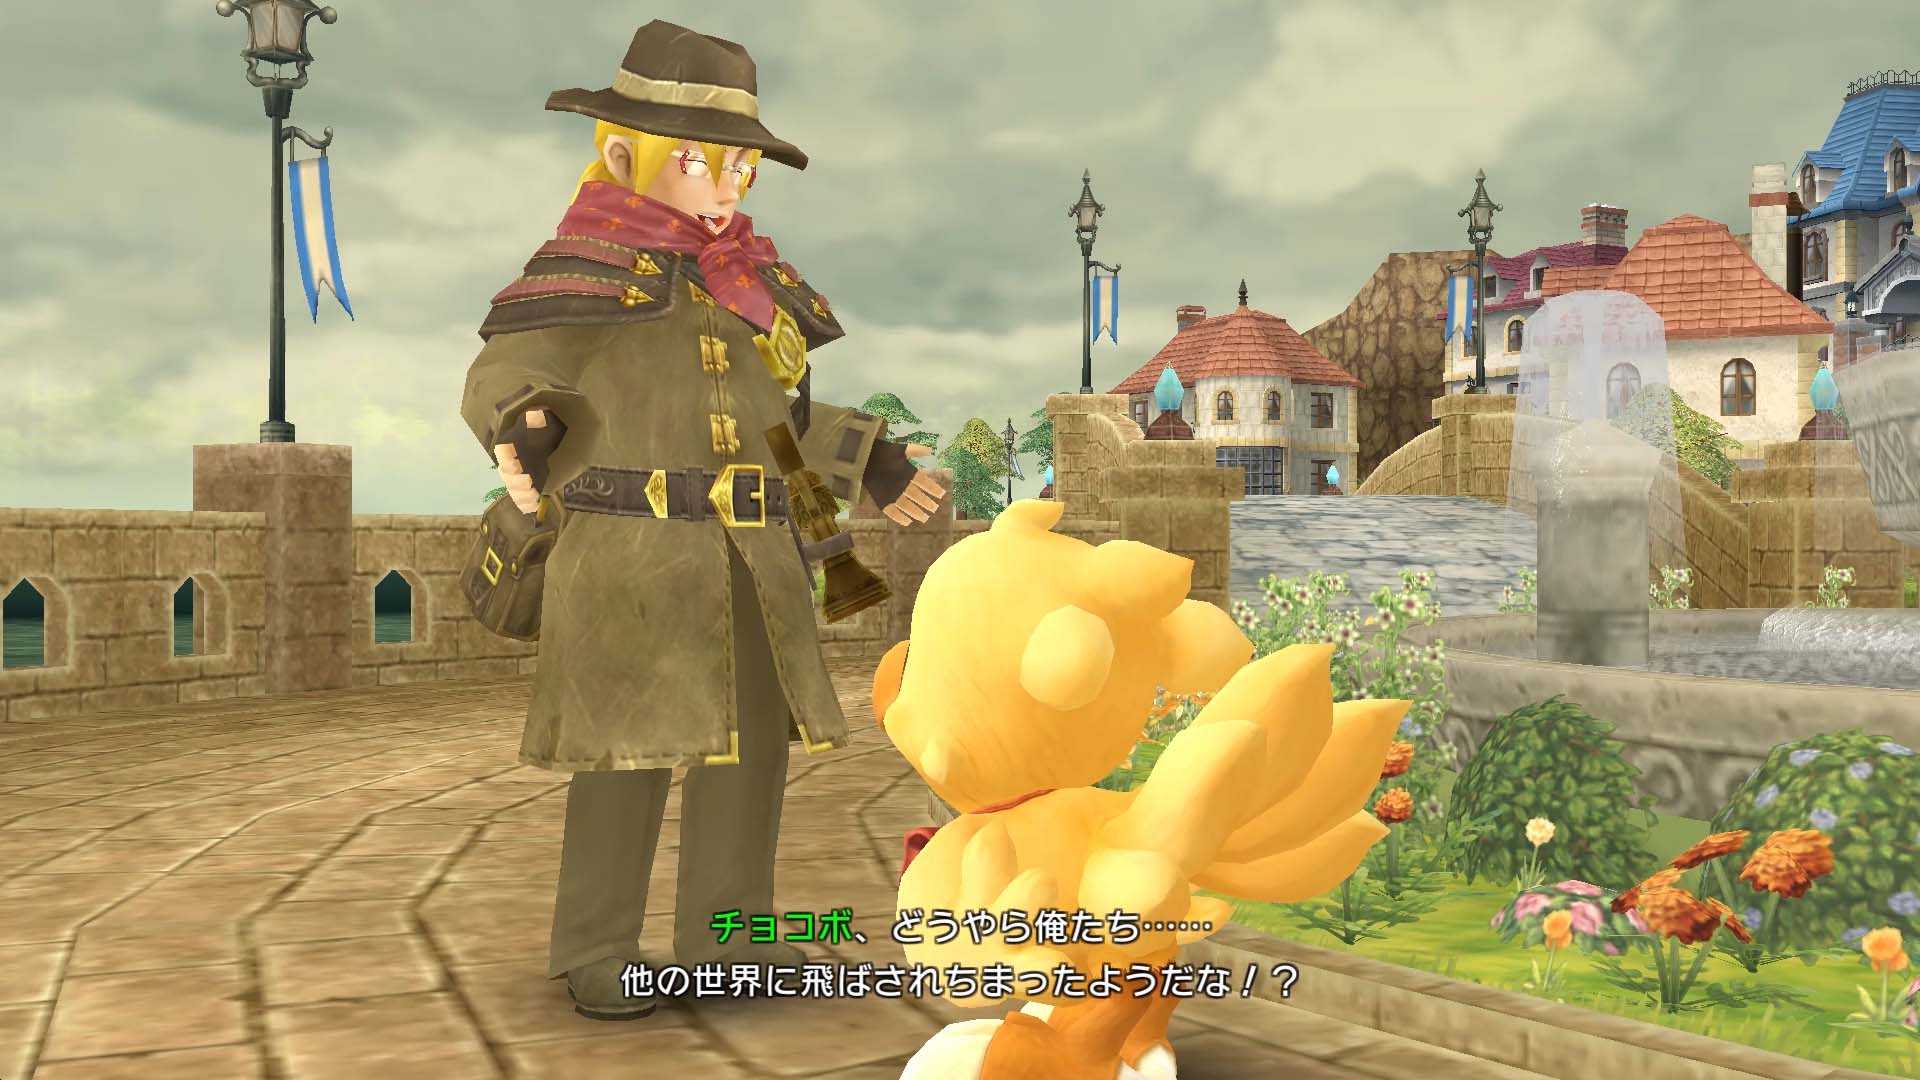 Final dungeon. Chocobo Mystery Dungeon. Final Fantasy Fables: Chocobo's Dungeon. Chocobo's Mystery Dungeon every buddy! Ps4. Final Fantasy Fables: Chocobo Tales.